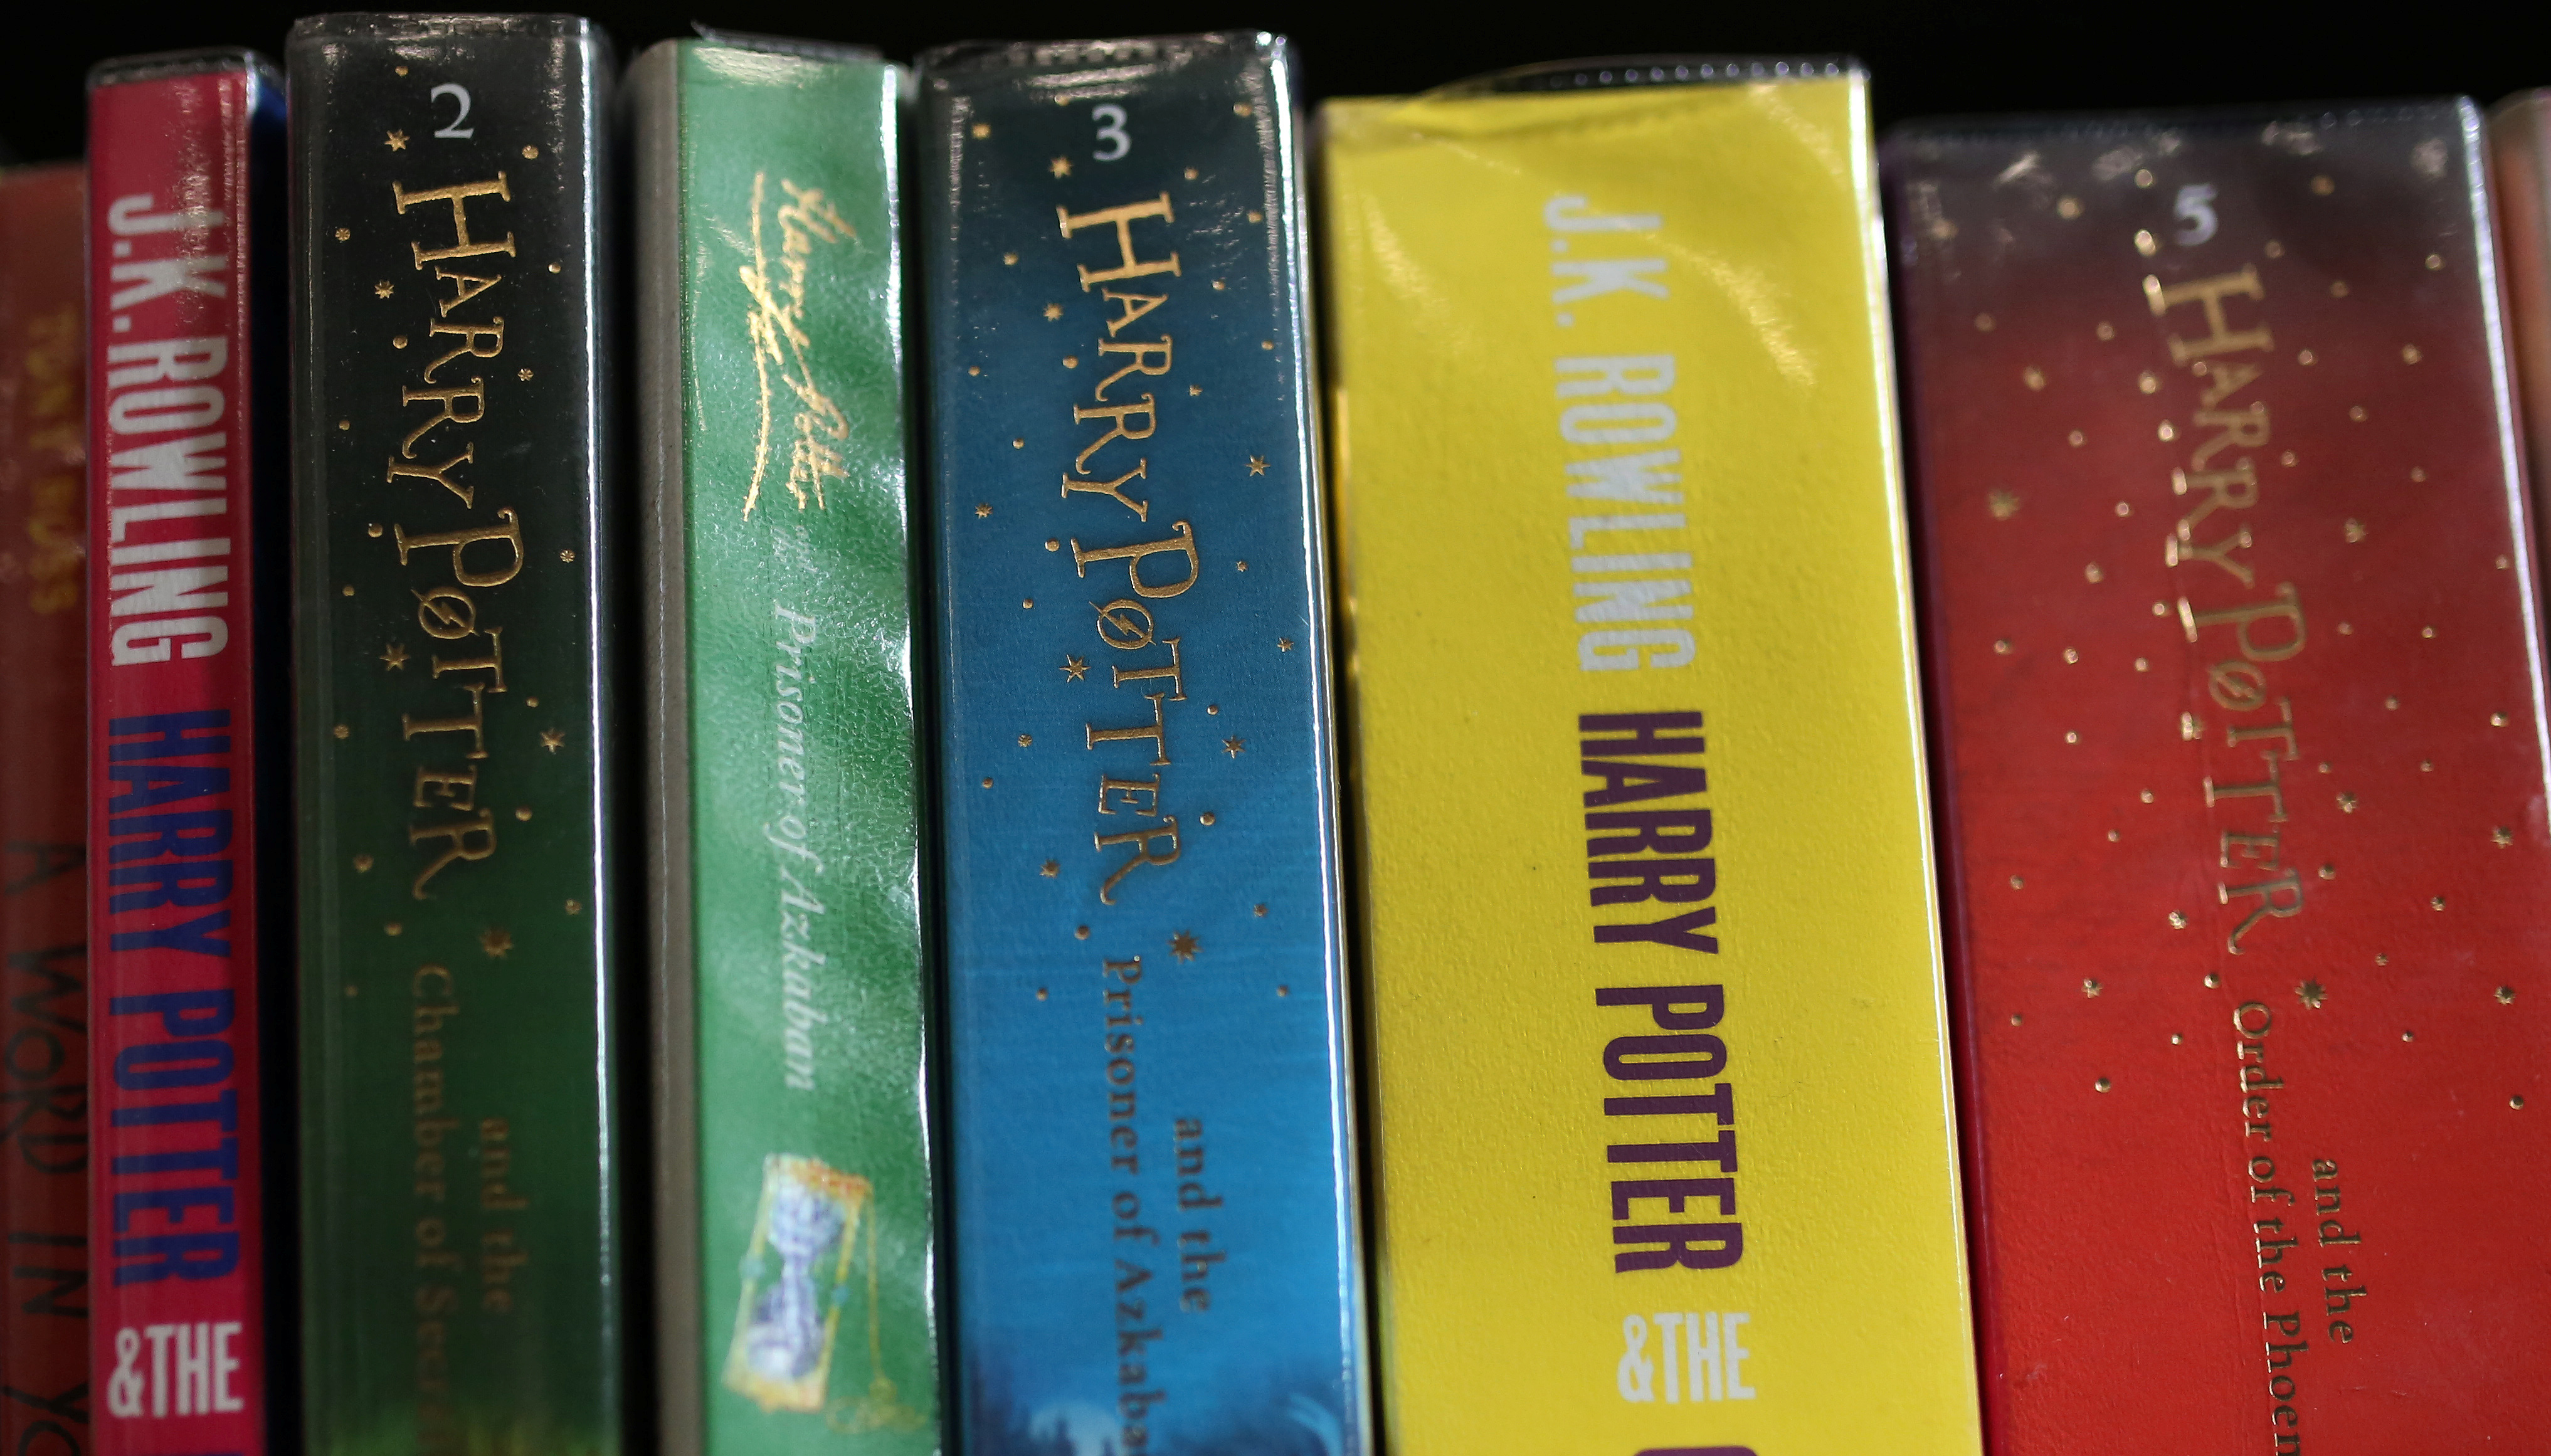 HBO reported nearing deal to reboot J.K. Rowling's 'Harry Potter' novels as  a TV series 